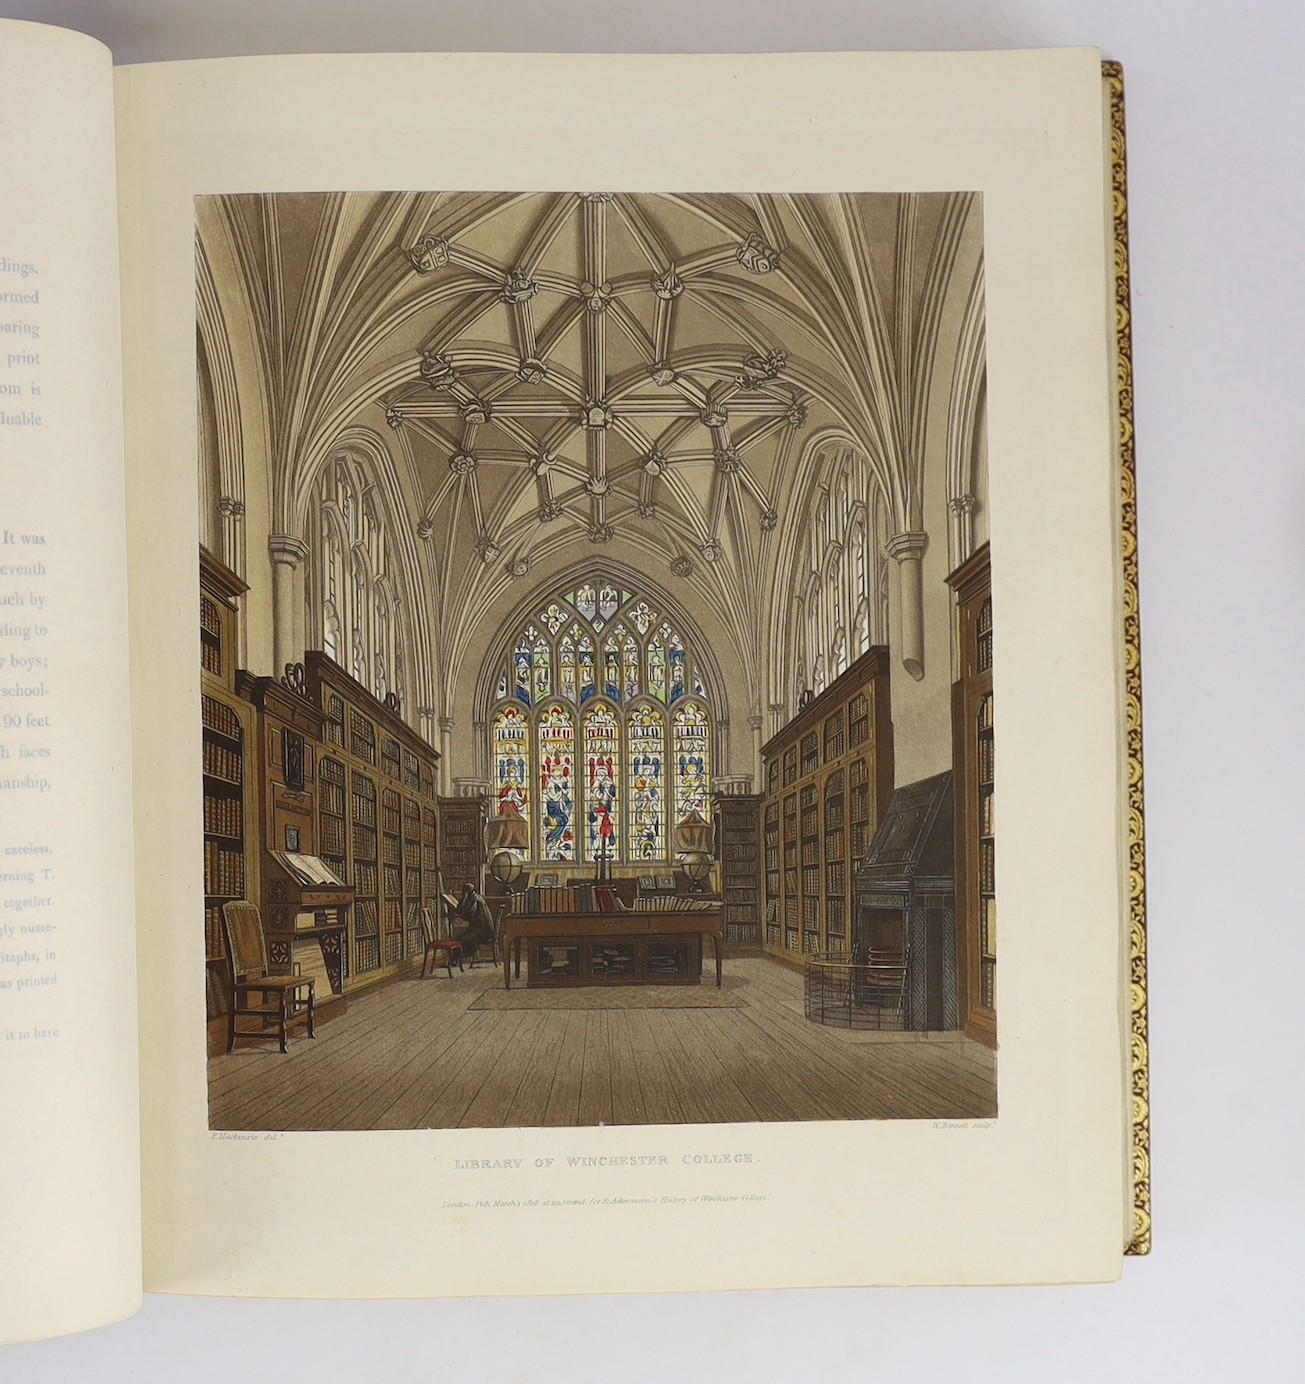 Ackermann Publications, Rudolph-London - The History of Winchester, Eton and Westminster….4to, red morocco gilt, by Birdsall, Northampton, with 48 hand-coloured plates after Pugin, Westall and others, London, 1816, with